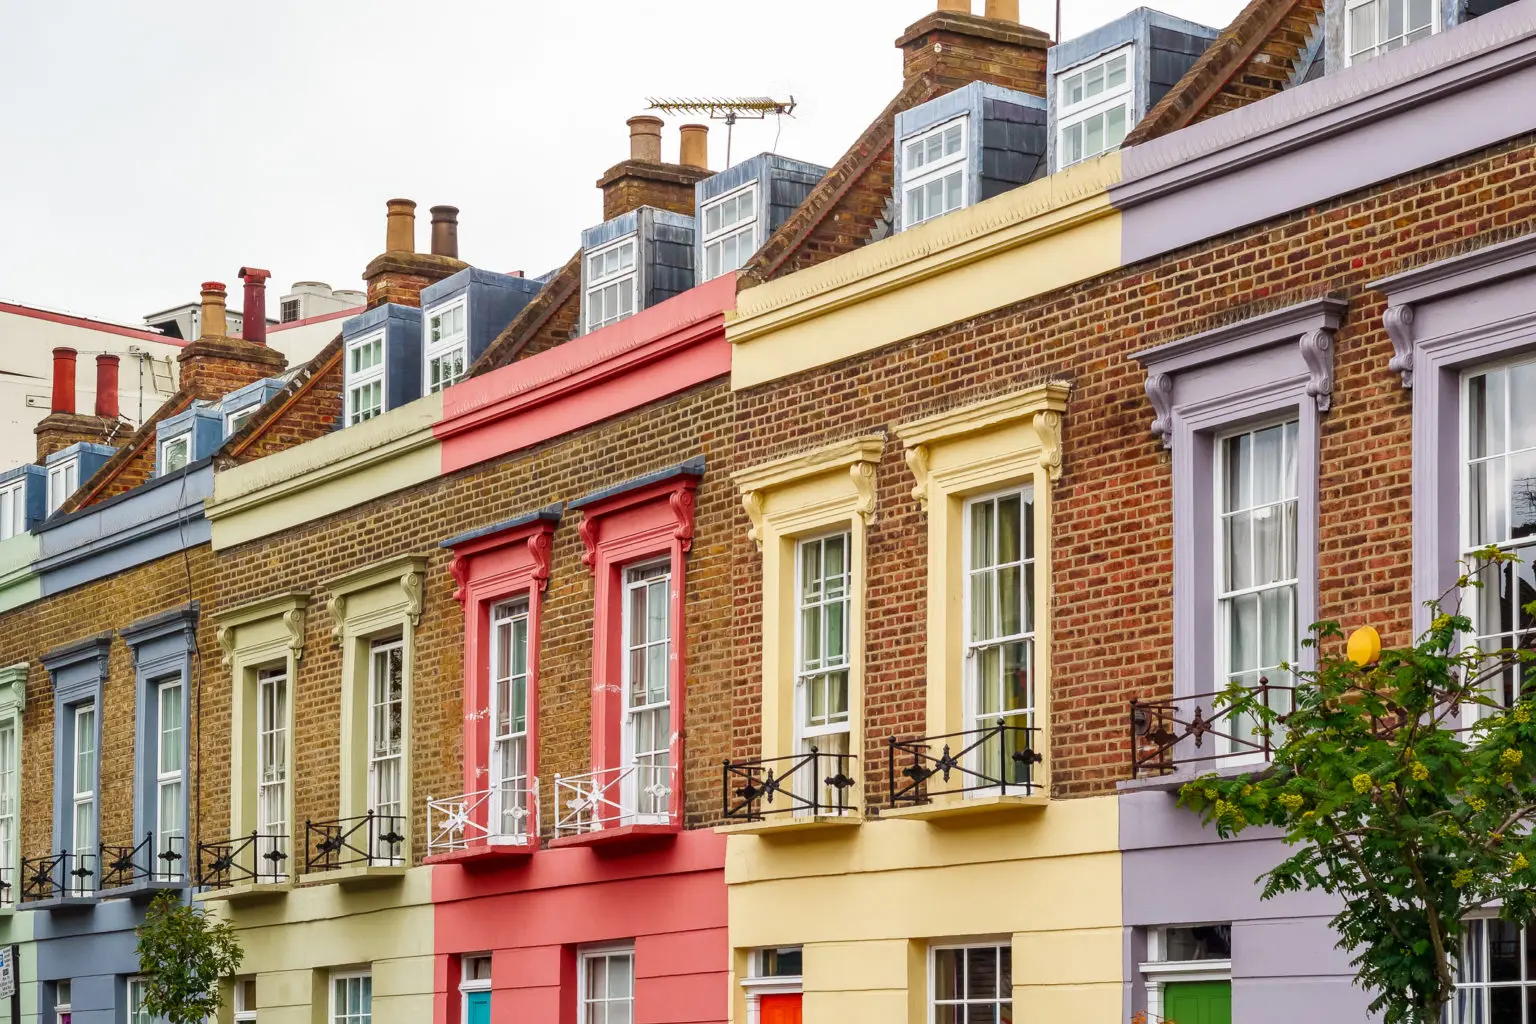 row of houses in the uk